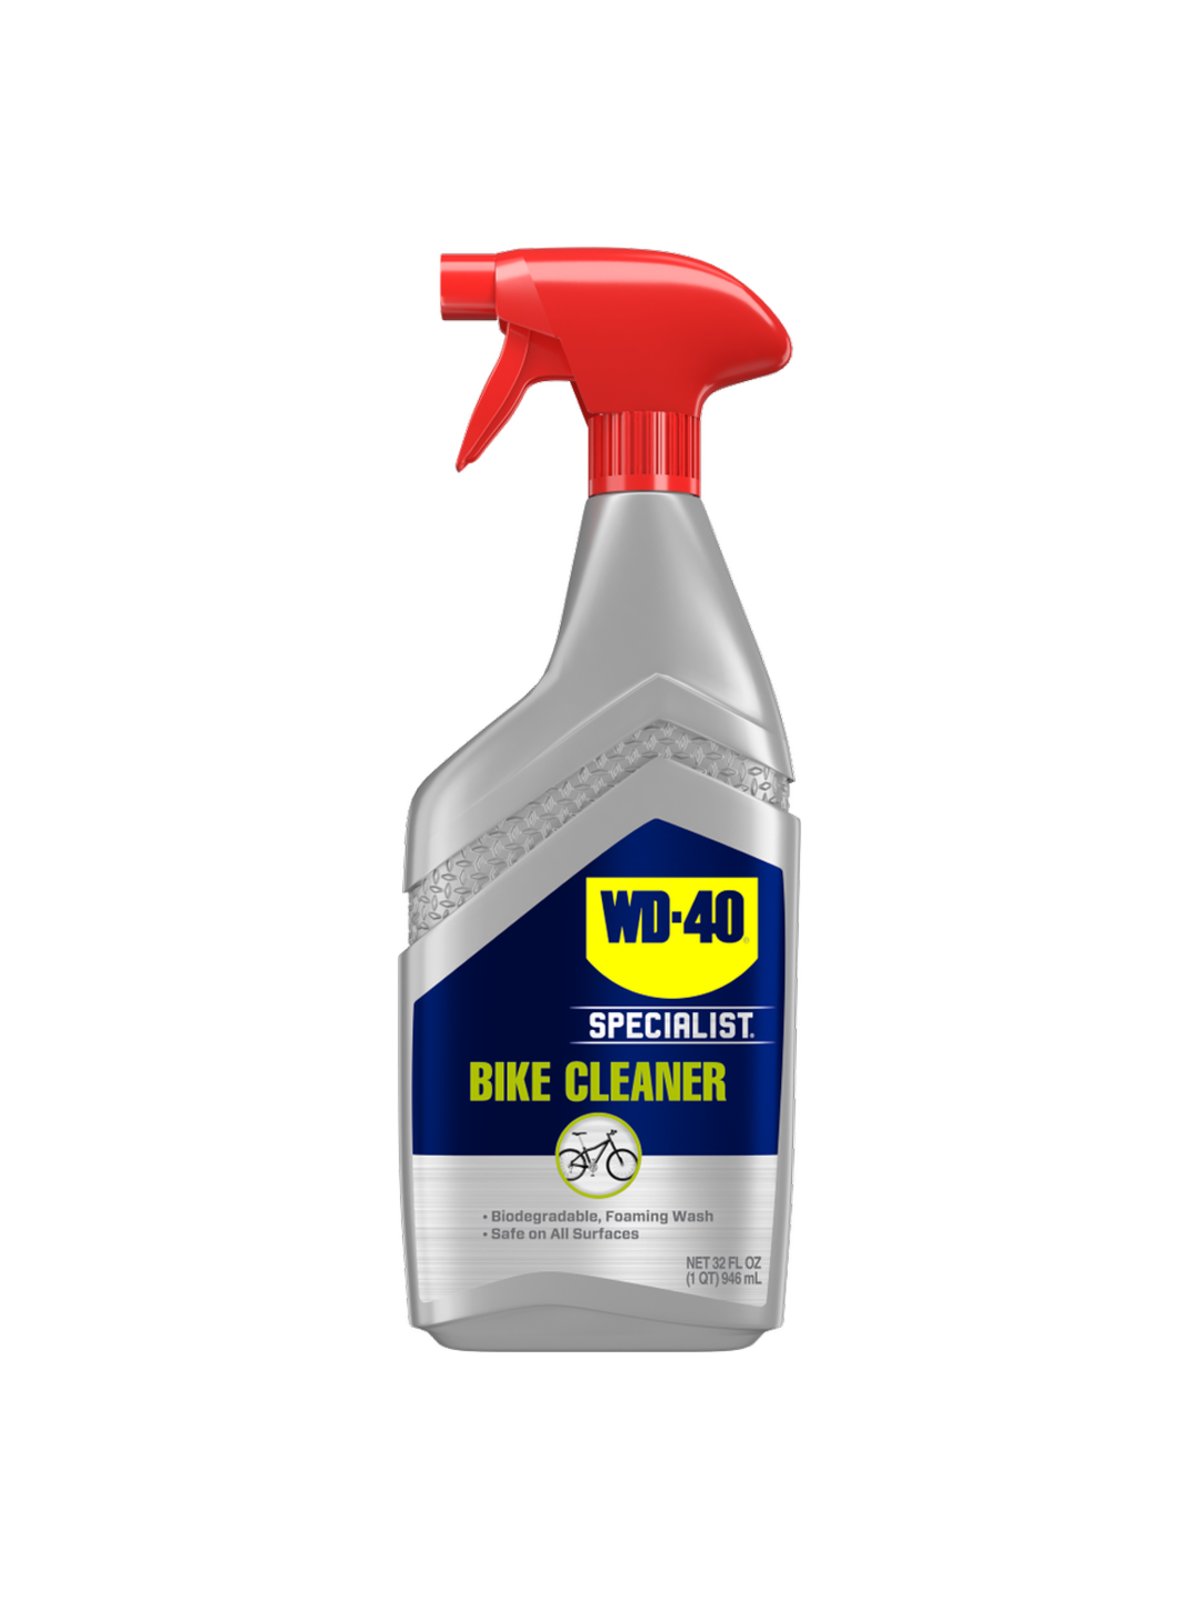 Review: WD-40 Bike Degreaser